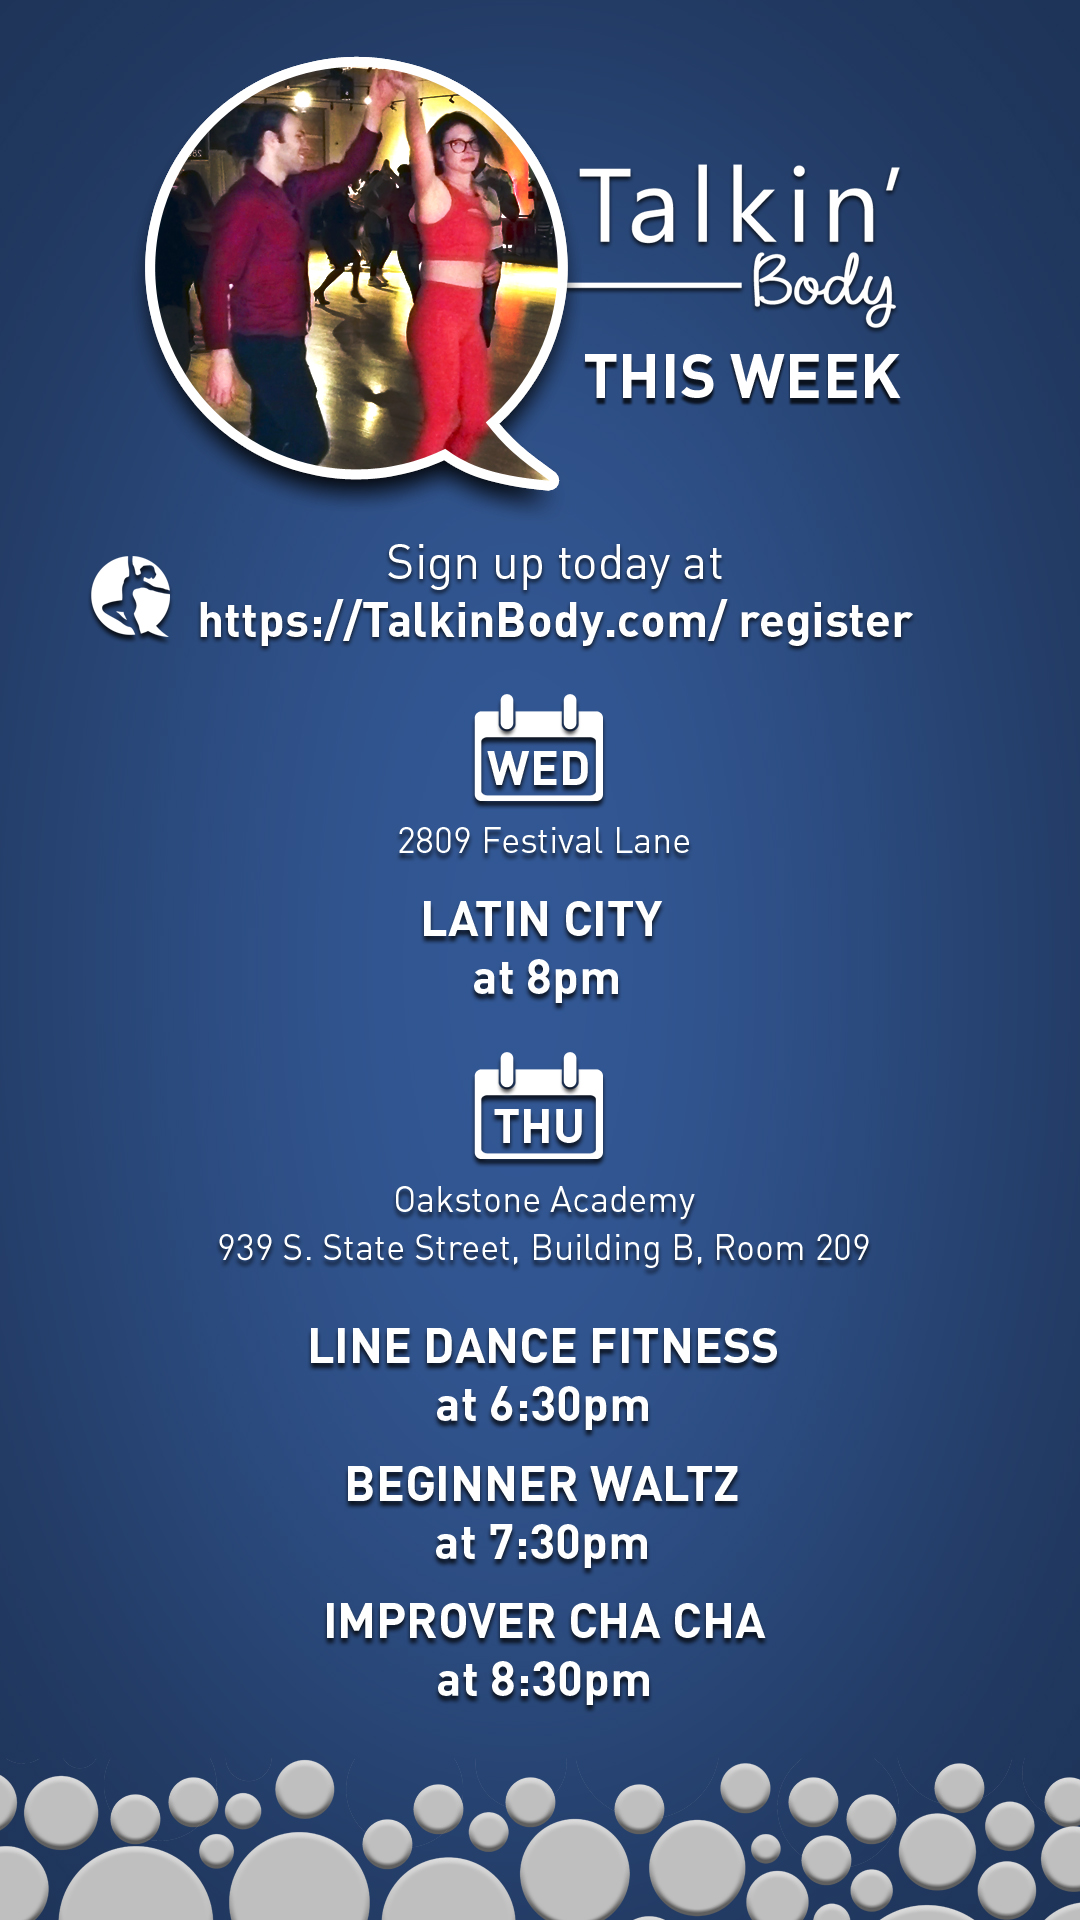 This Week with Talkin Body